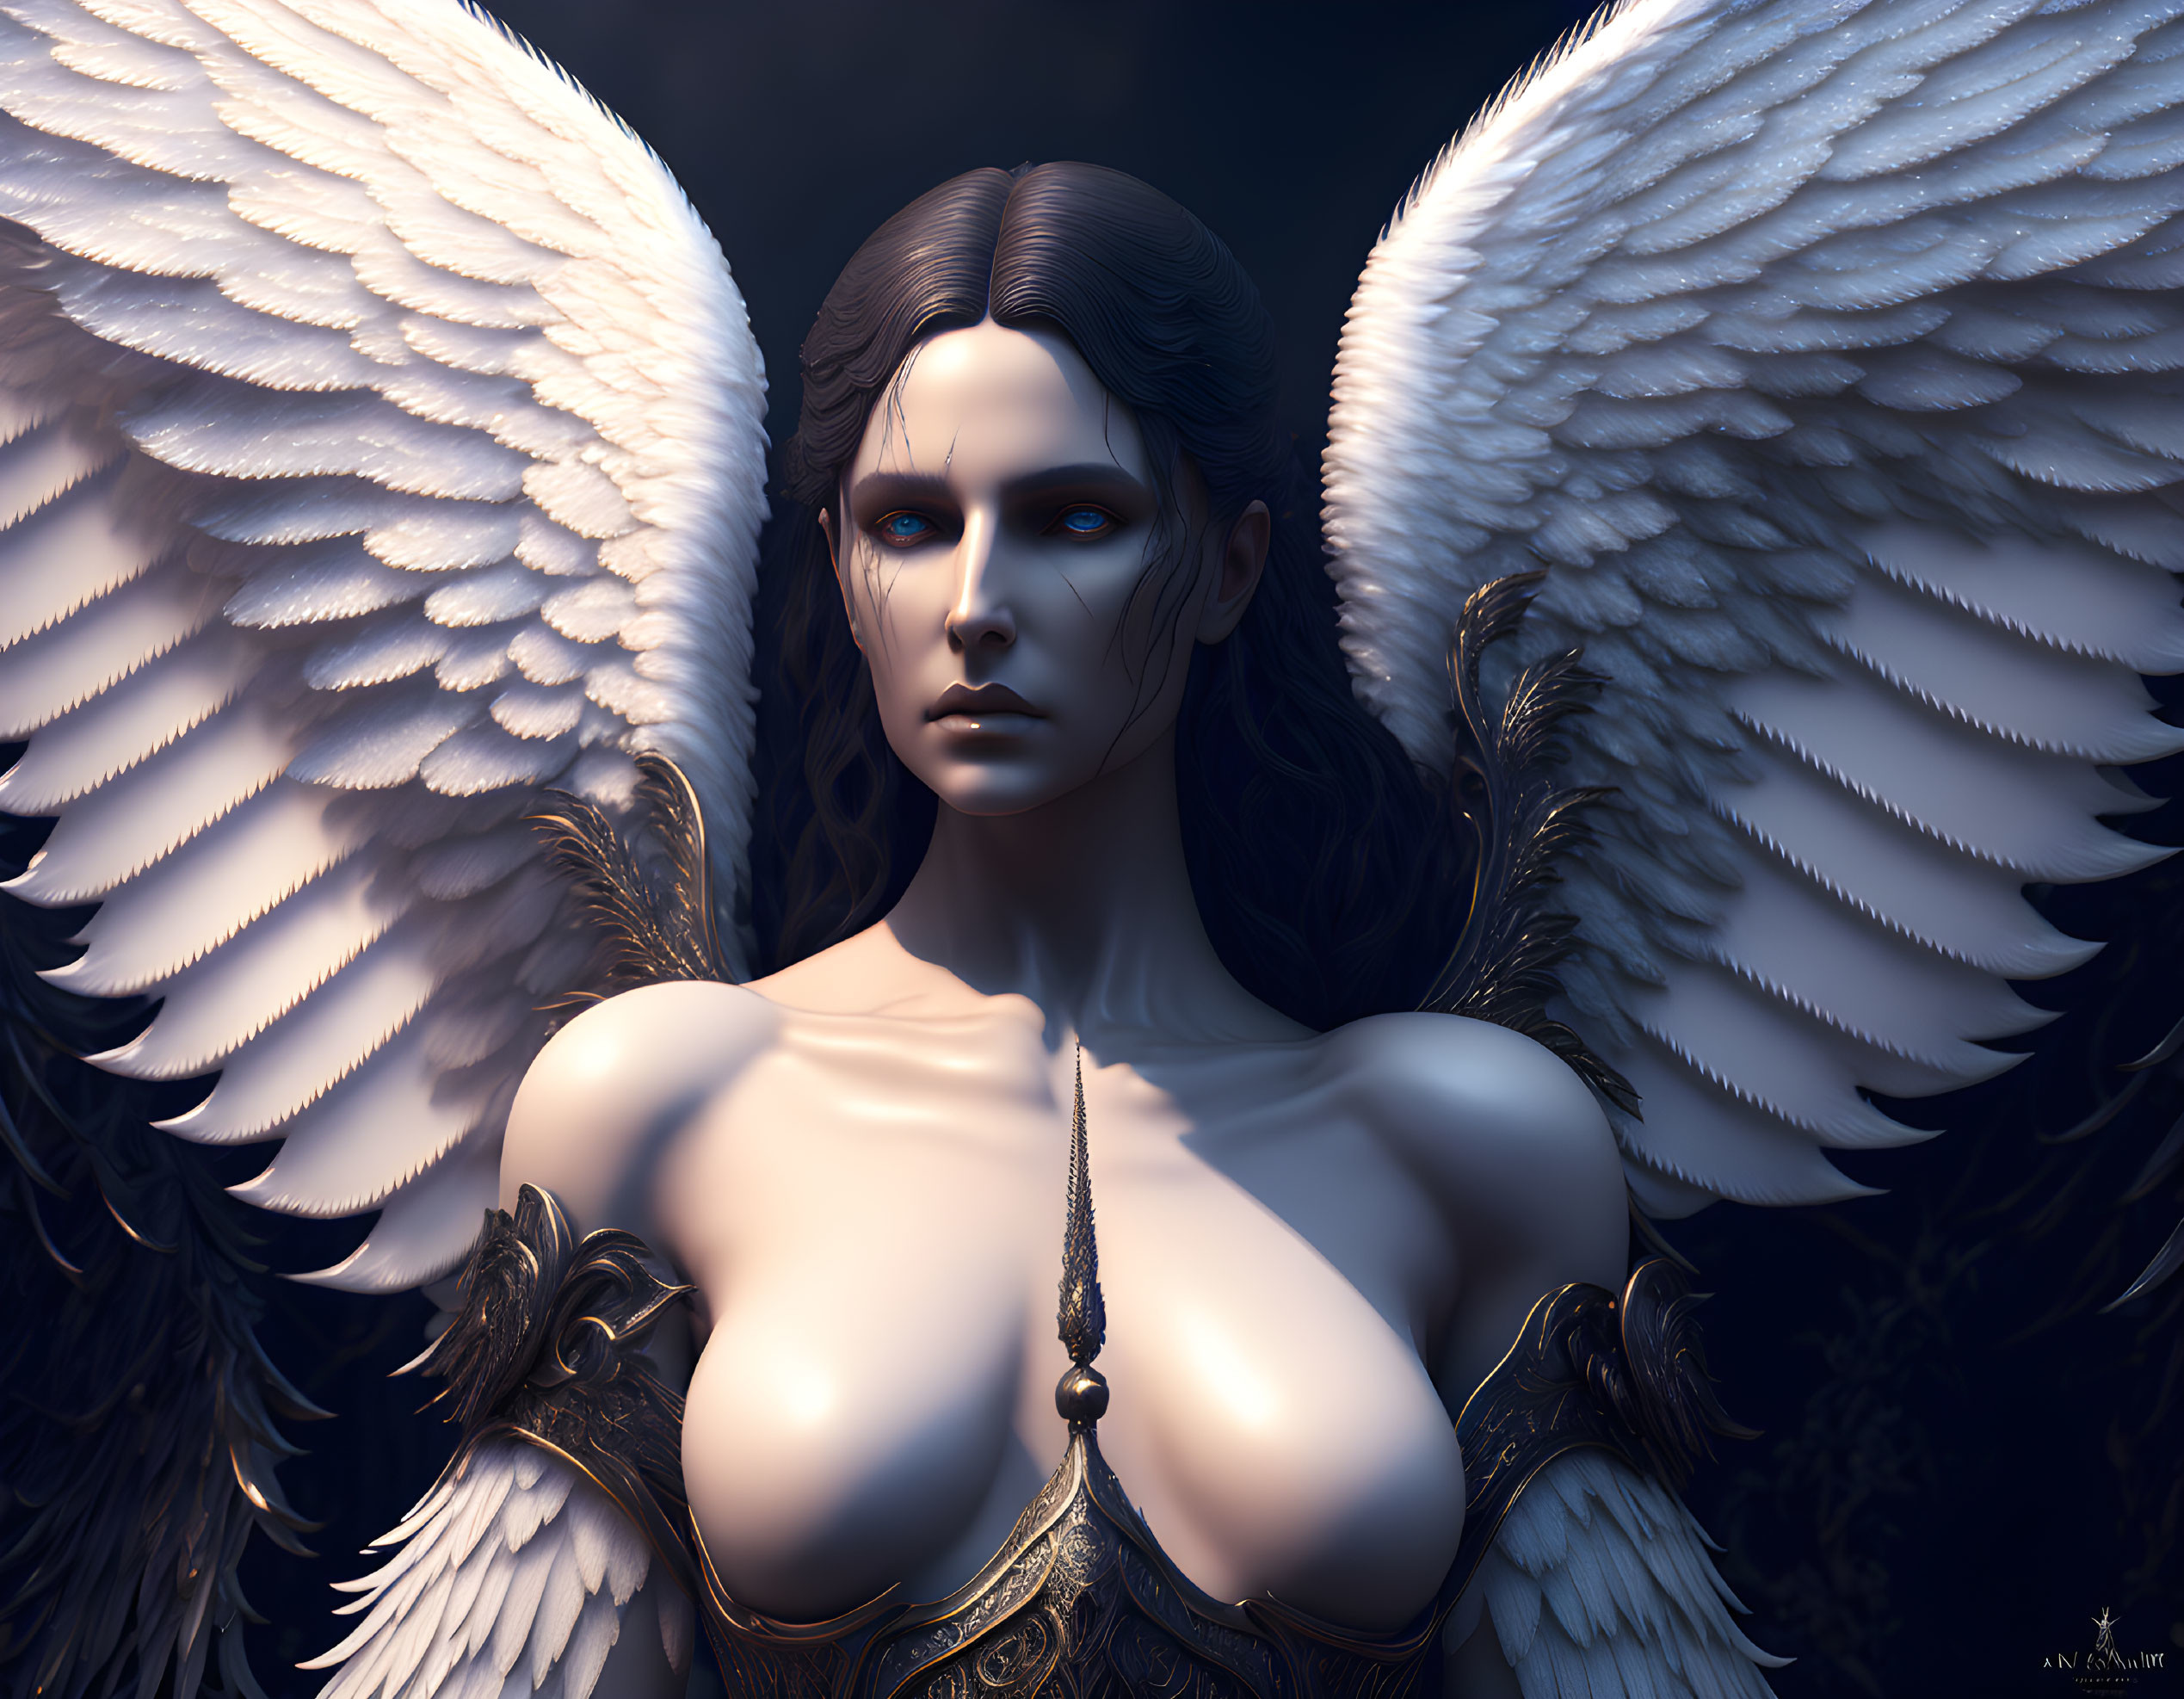 Digital Artwork: Woman with White Angel Wings and Golden Chest Piece